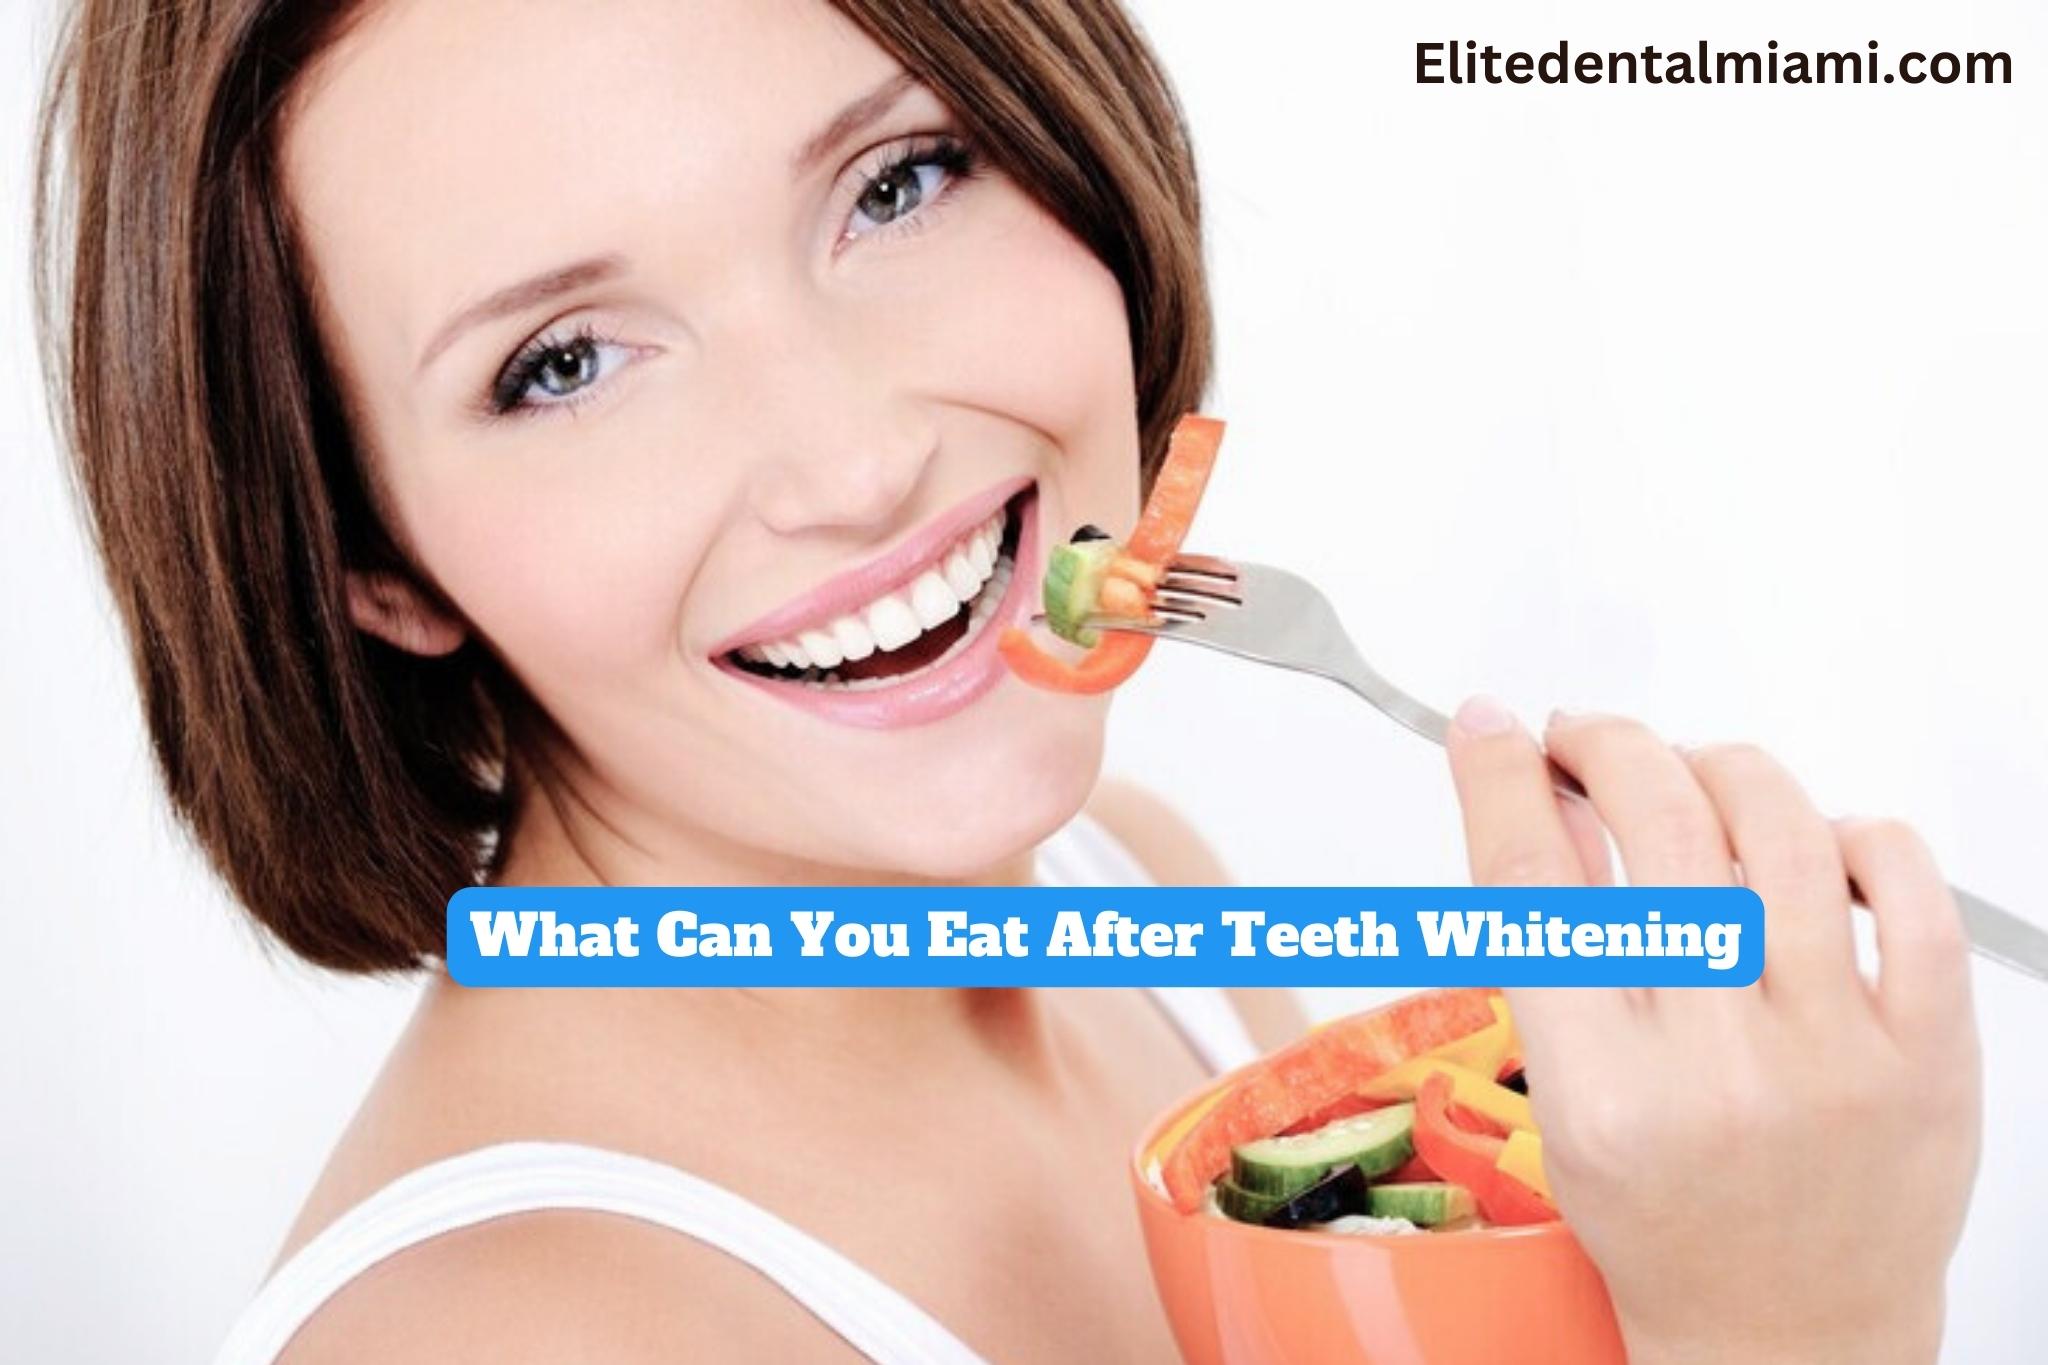 What Can You Eat After Teeth Whitening